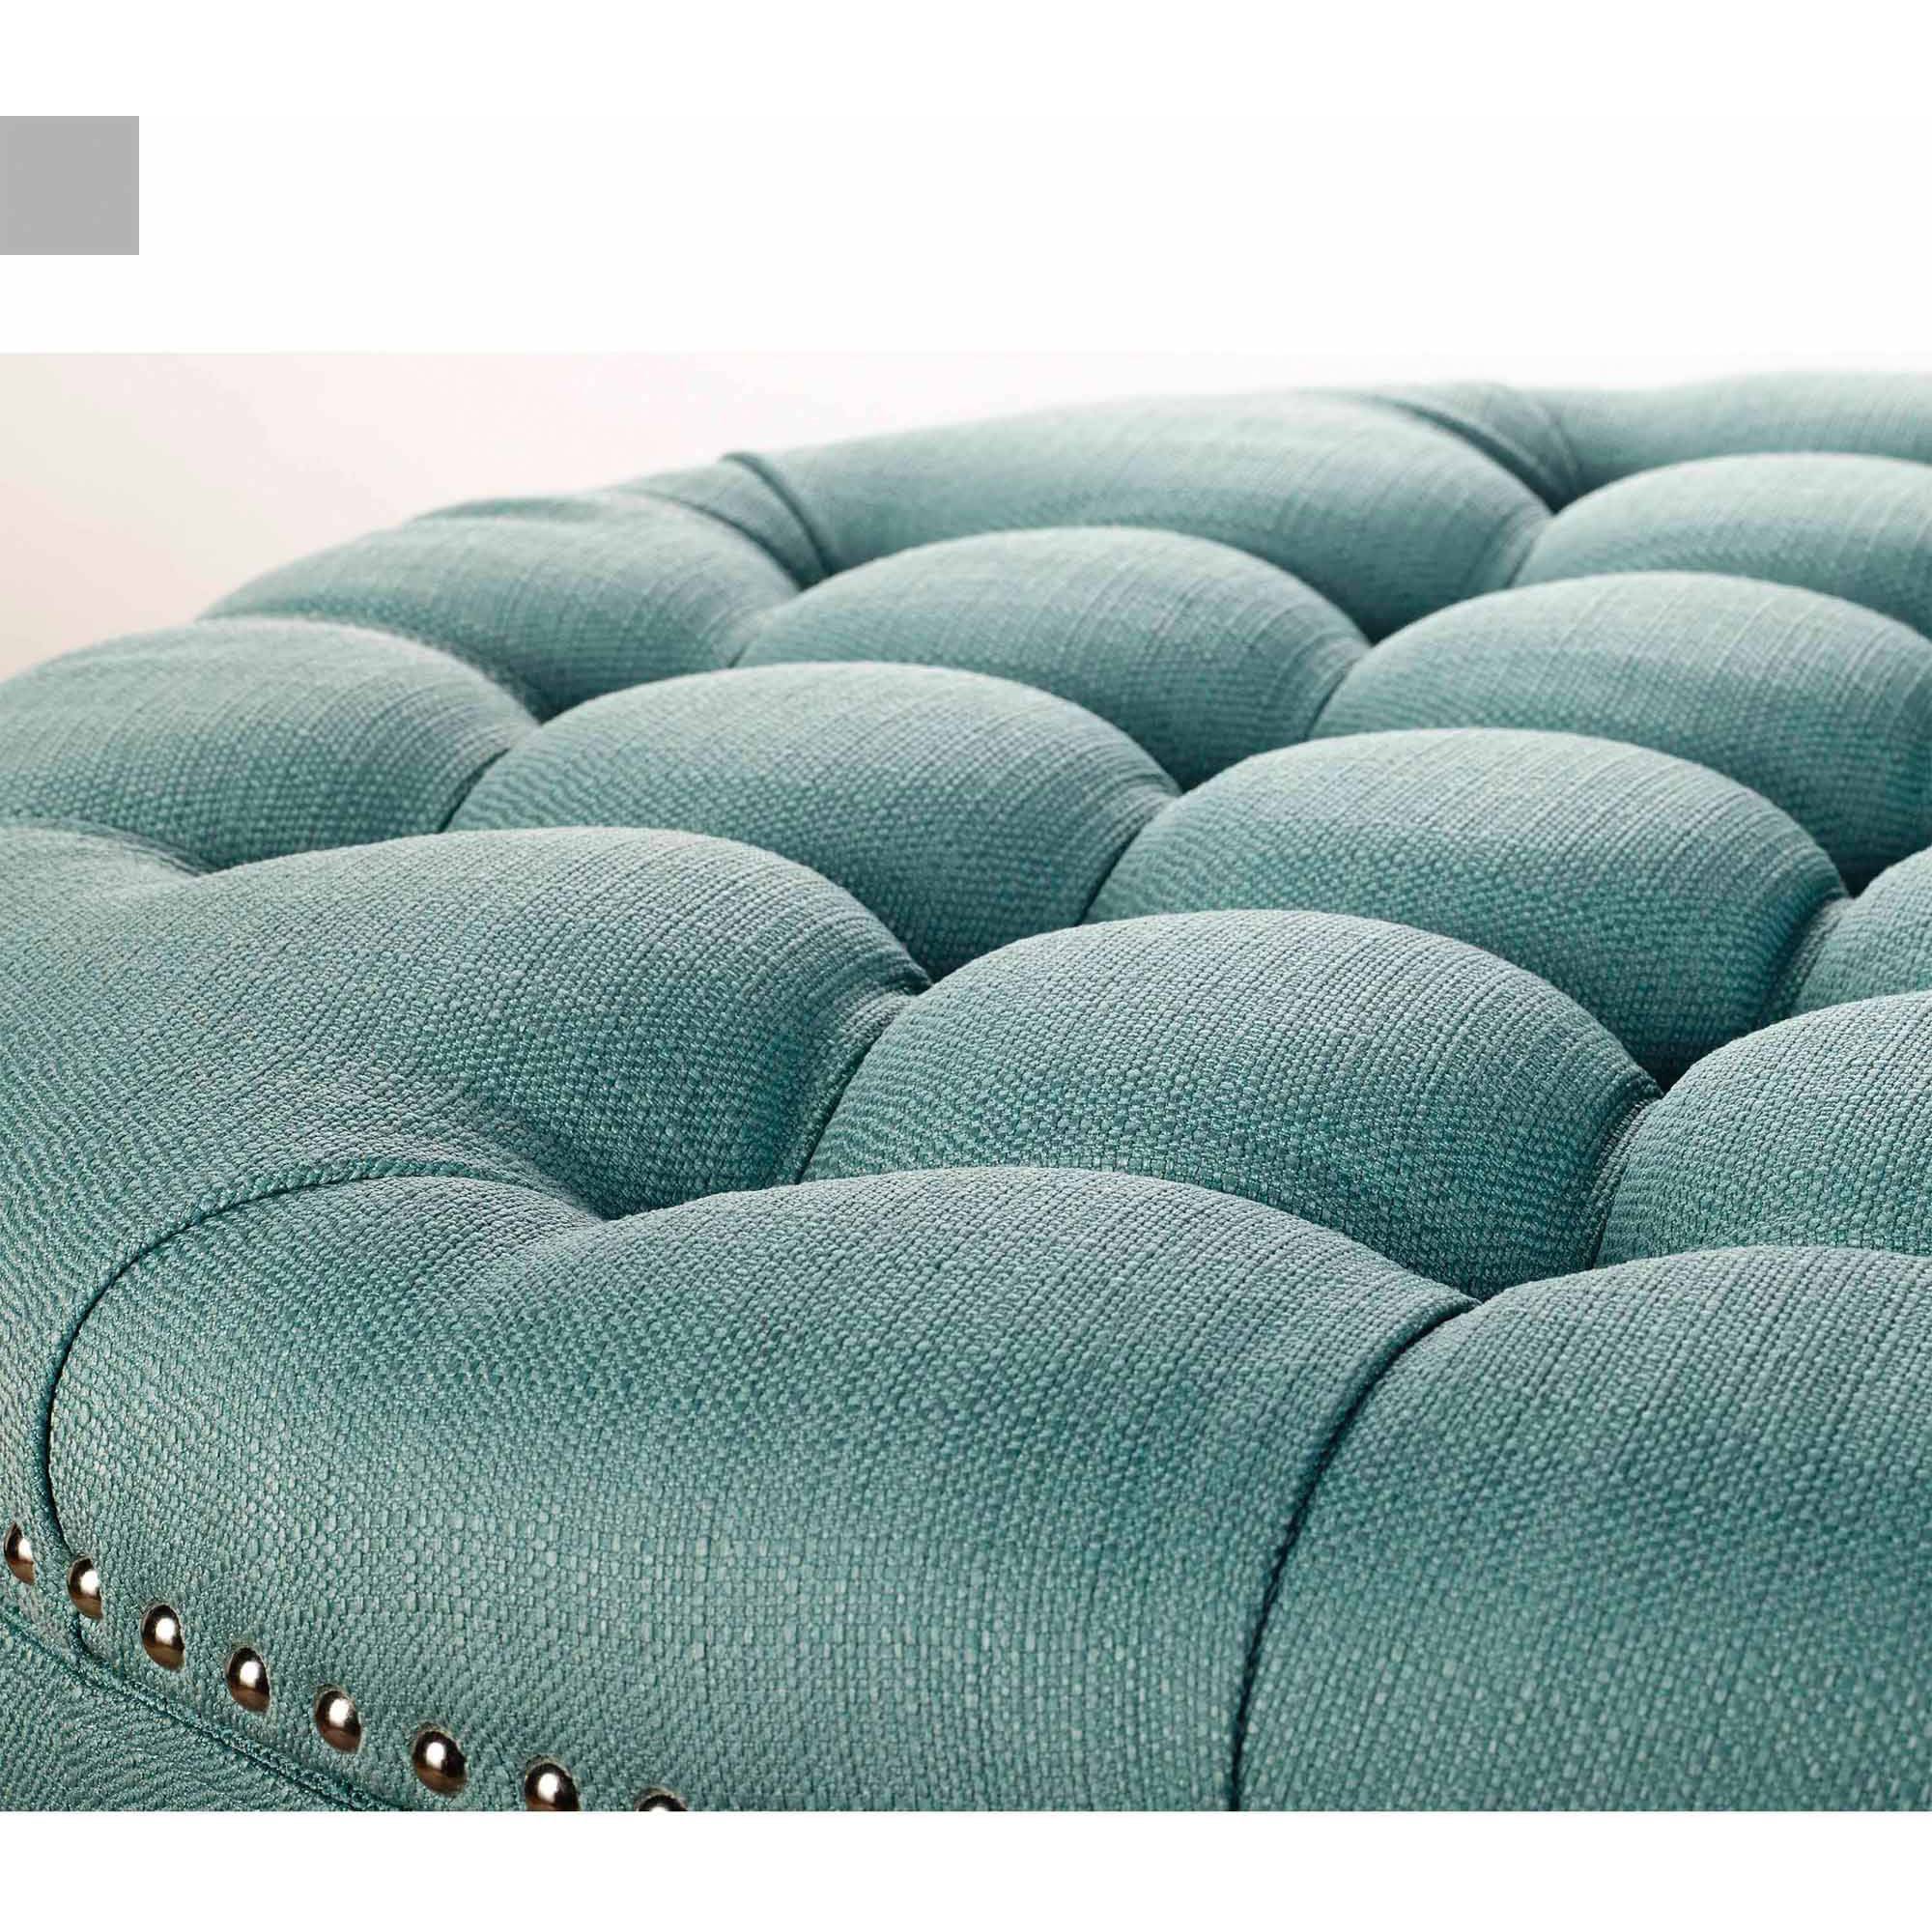 Better Homes & Gardens Round Tufted Storage Ottoman with Nailheads, Teal - image 2 of 4